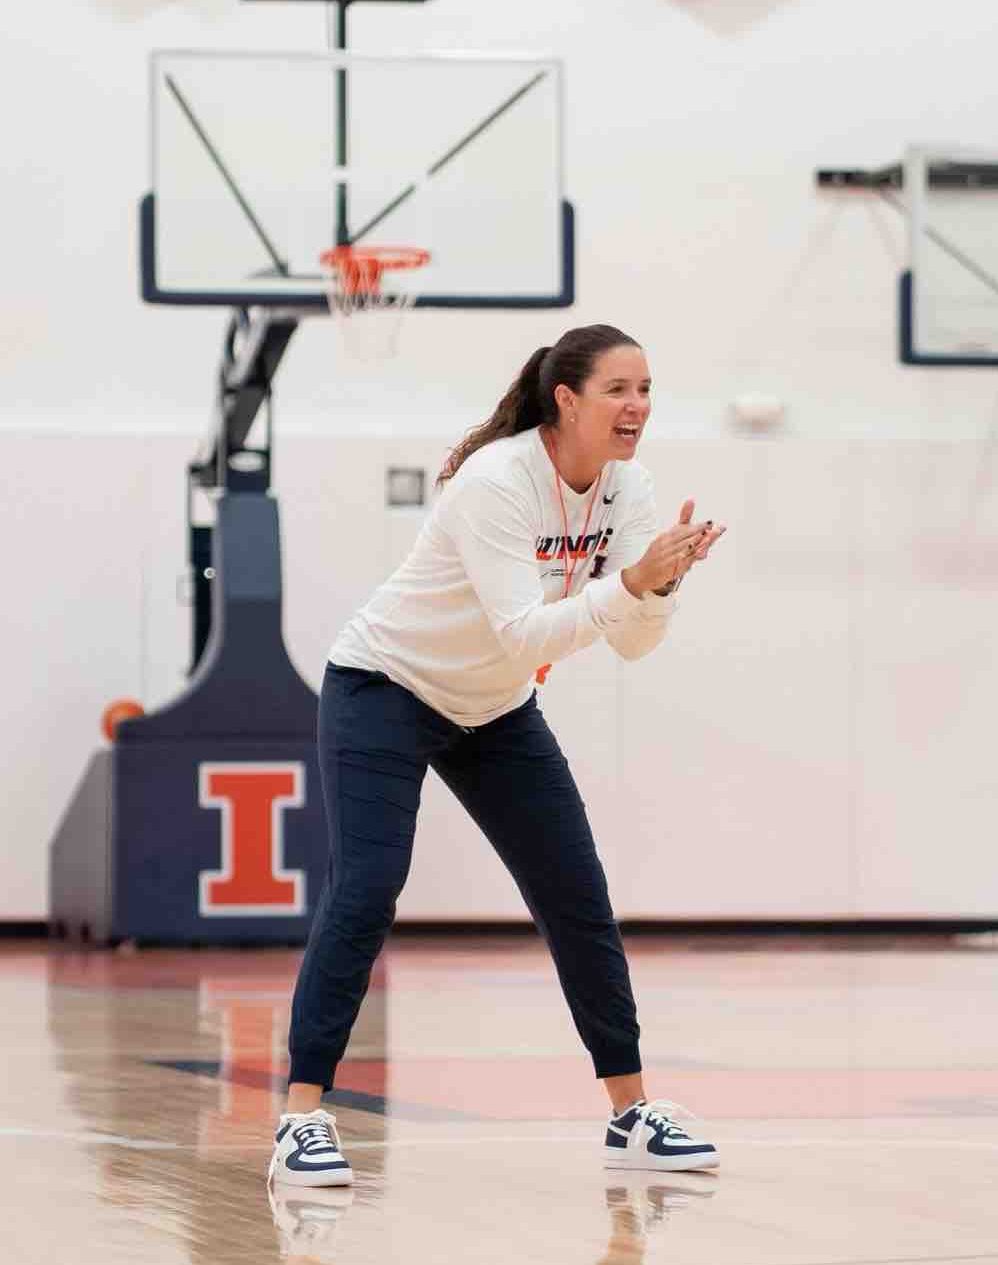 Illinois Women's Basketball - Deserving of Its National Ranking